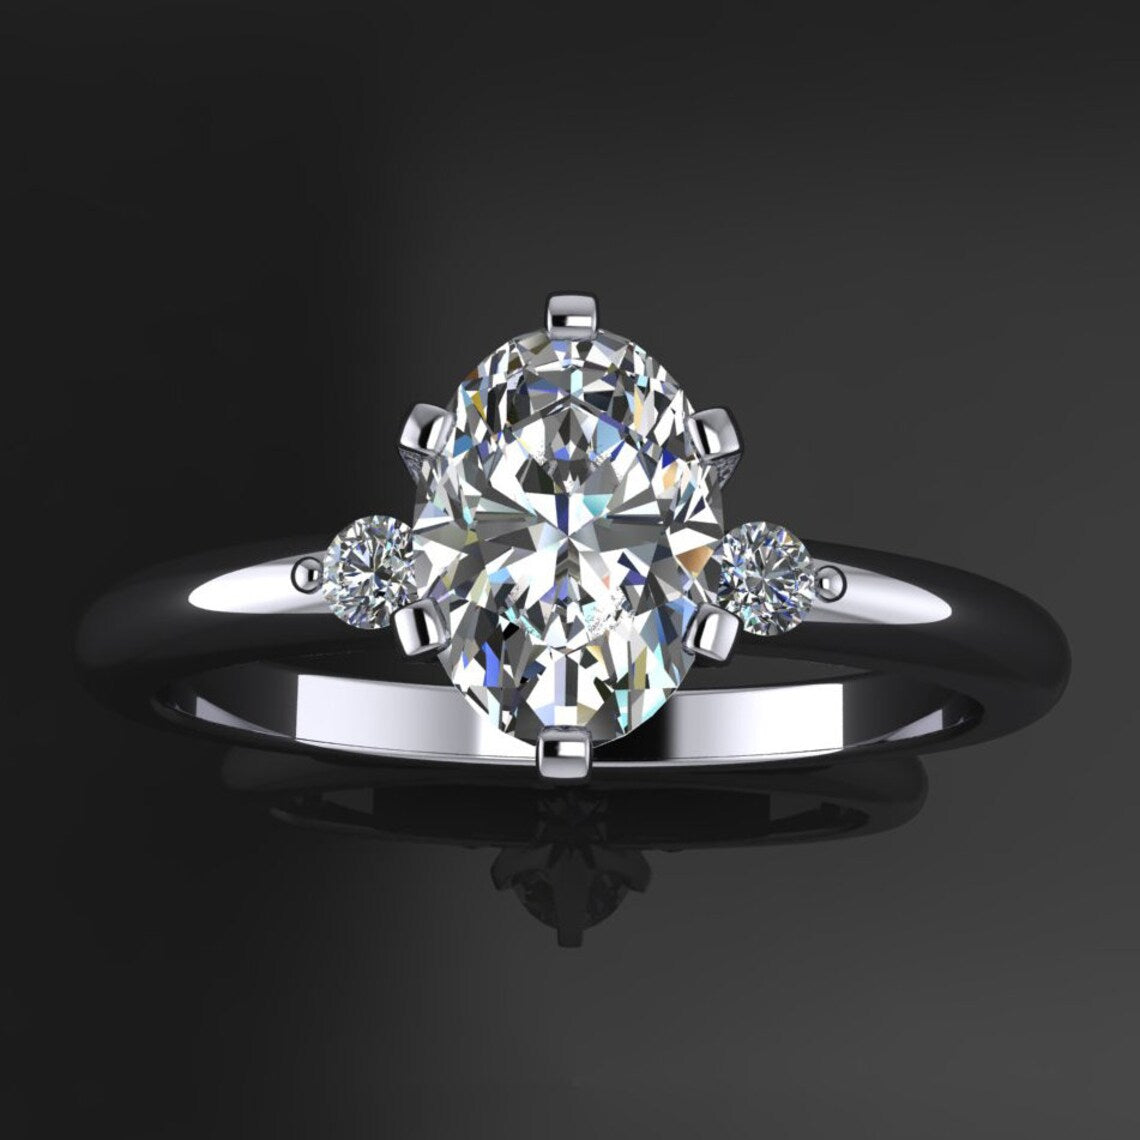 angela ring – 1 carat oval NEO moissanite engagement ring, three stone ring - J Hollywood Designs